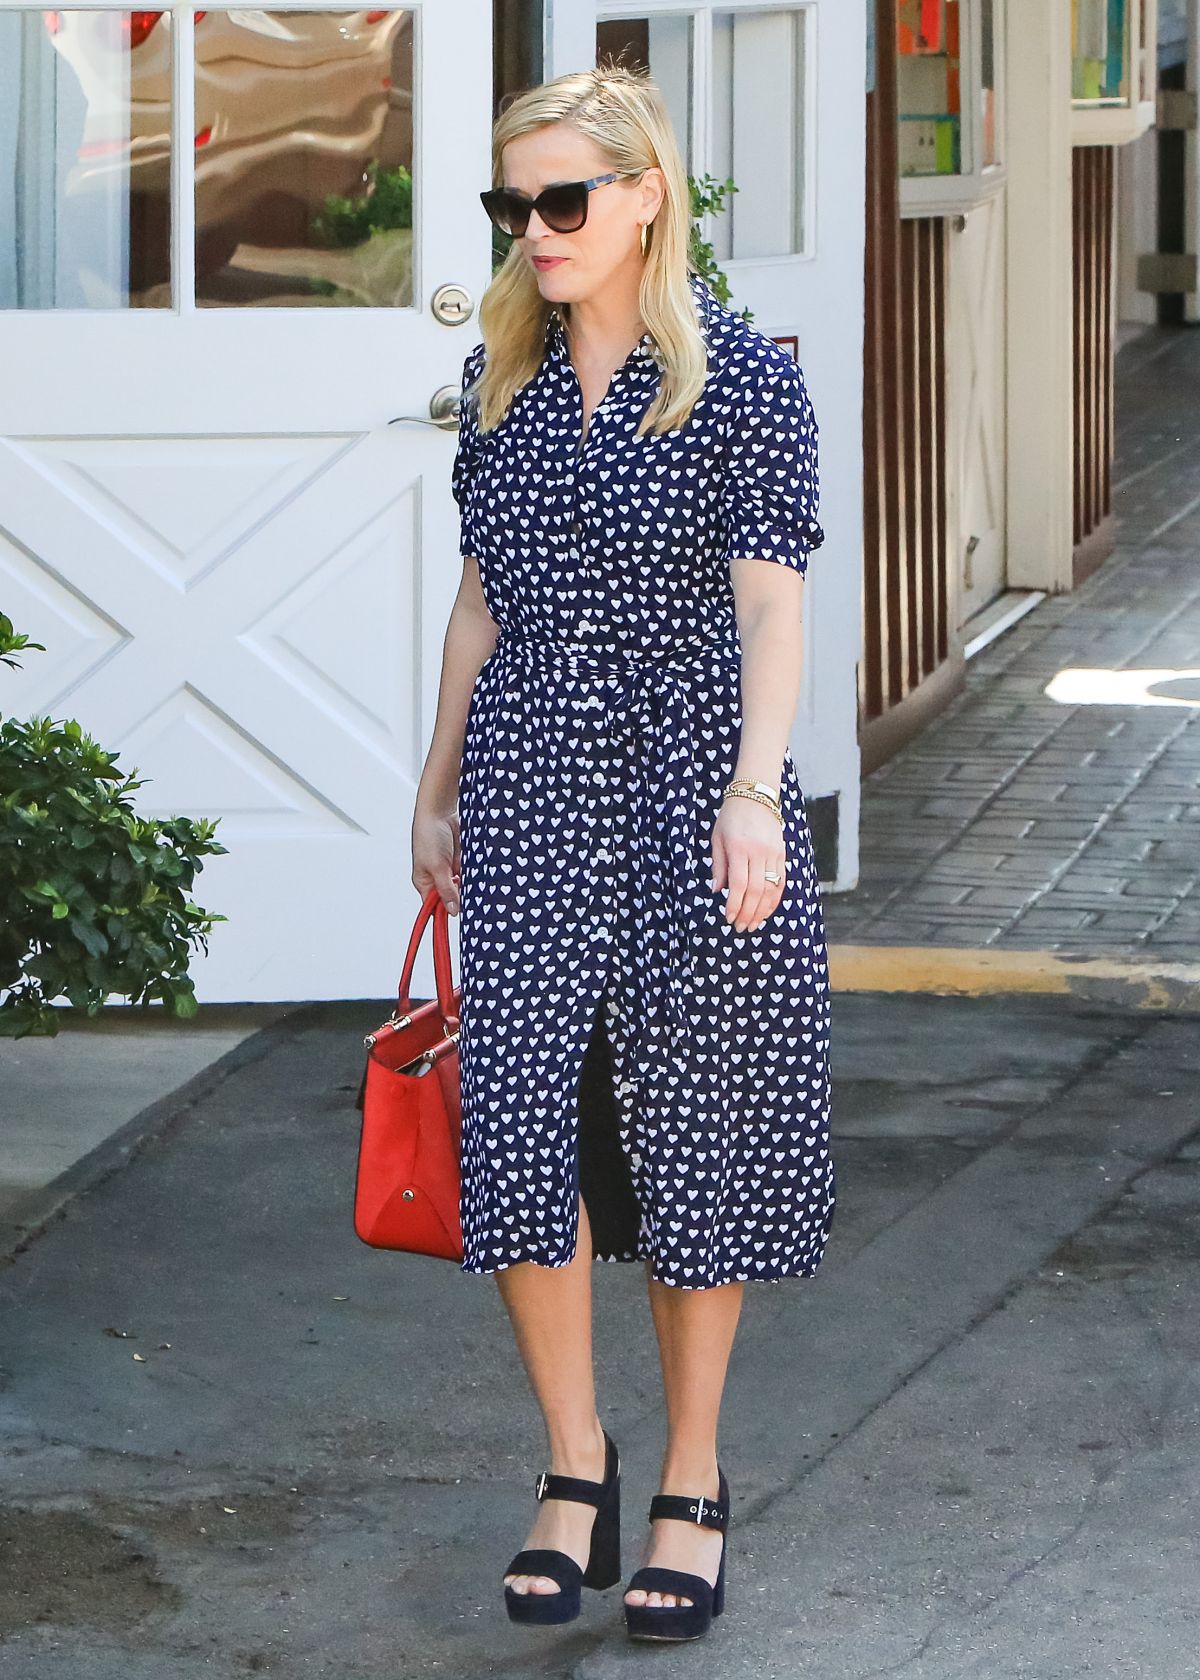 REESE WITHERSPOON Out in Los Angeles 02/09/2018 – HawtCelebs